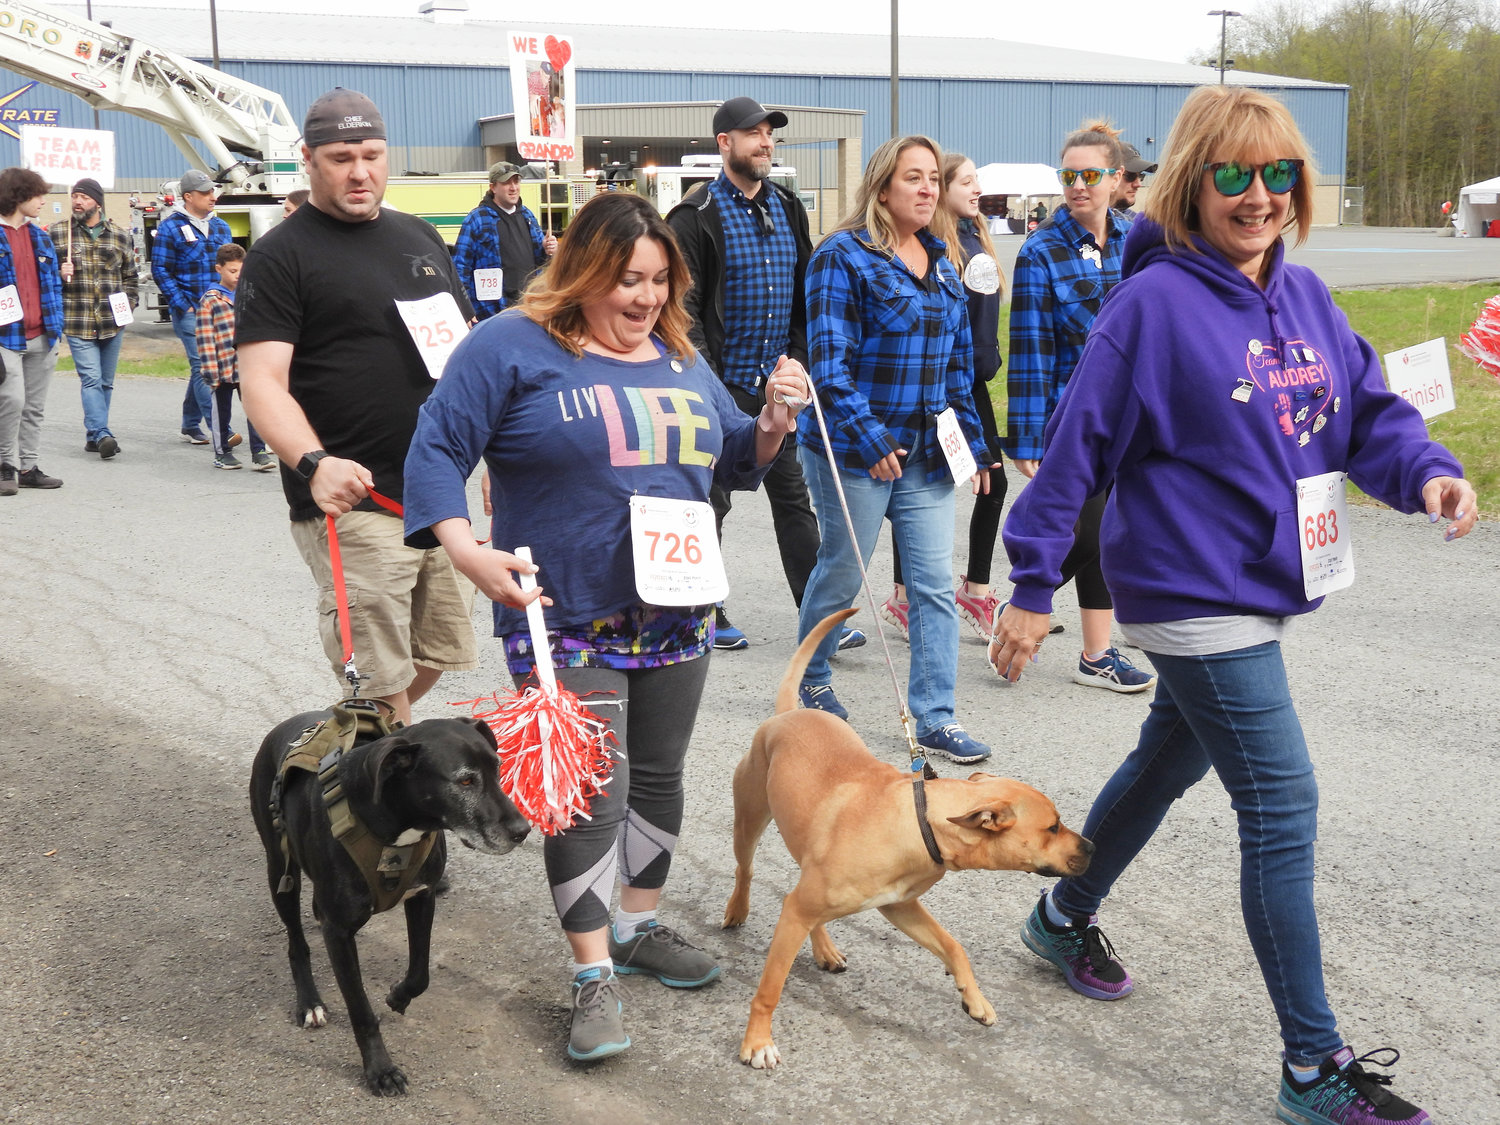 Walkers set out for the America's Greatest Heart Run and Walk on Satuday, May 7 from Accelerate Sports, walking the 3k to raise awareness and support for heart health